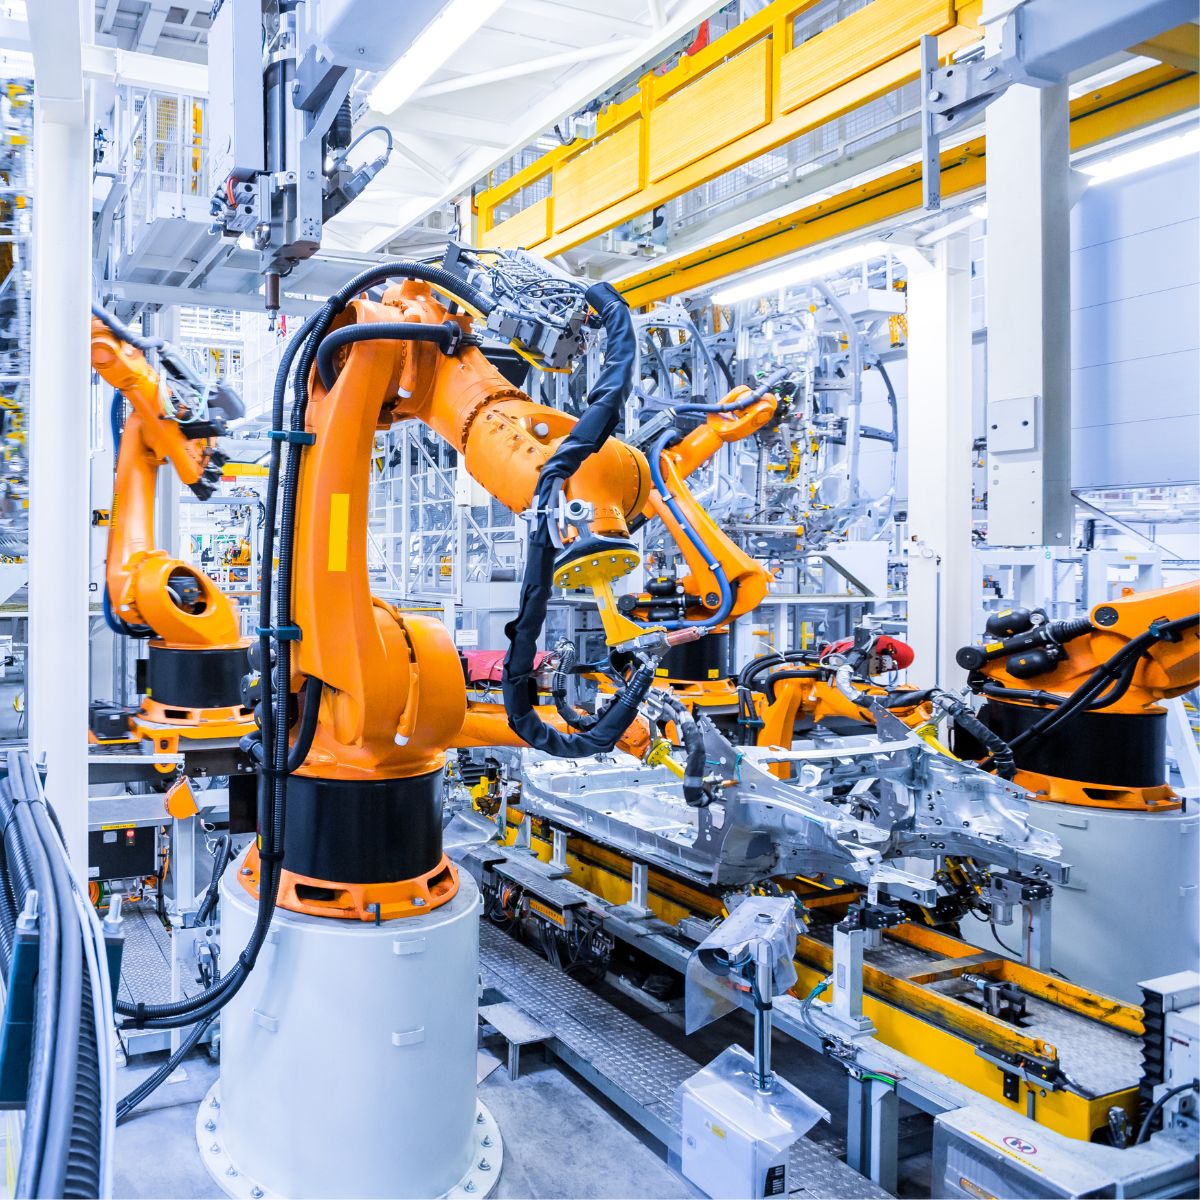 Can sustainable manufacturing be achieved through digital technology?